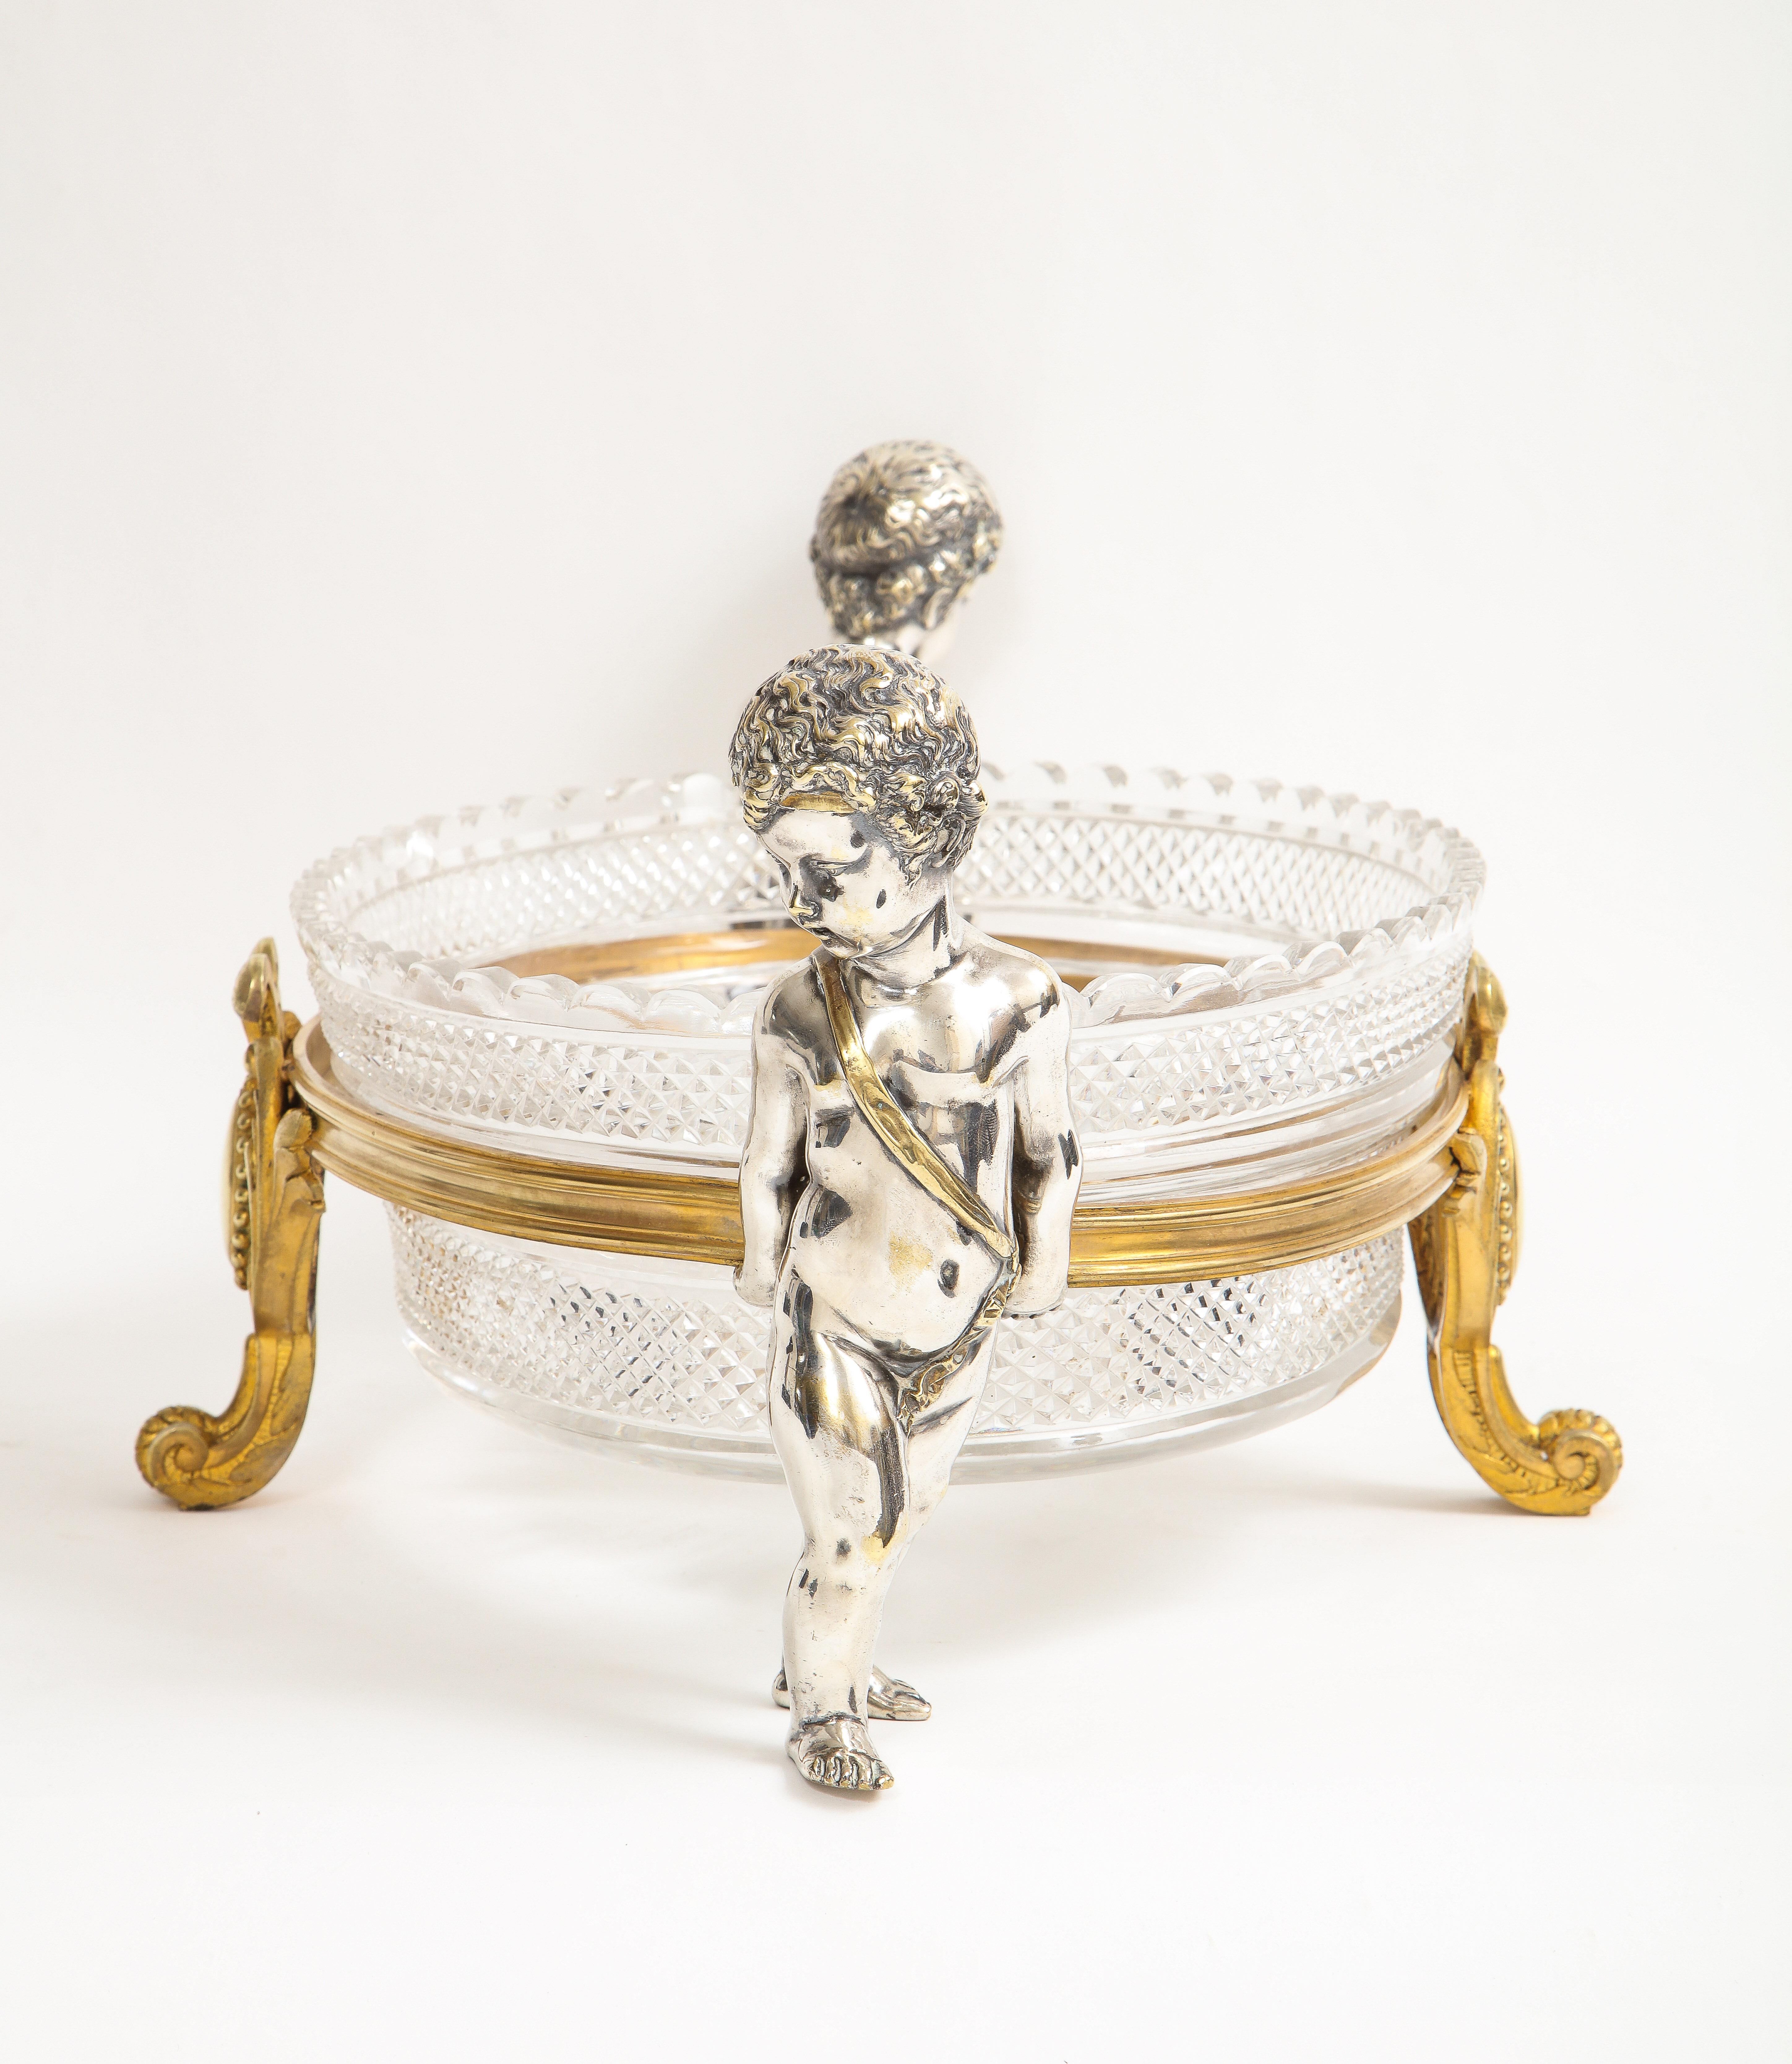 French Silvered & Gilt Bronze Putti Mounted Crystal Centerpiece Baccarat, 1800s For Sale 2